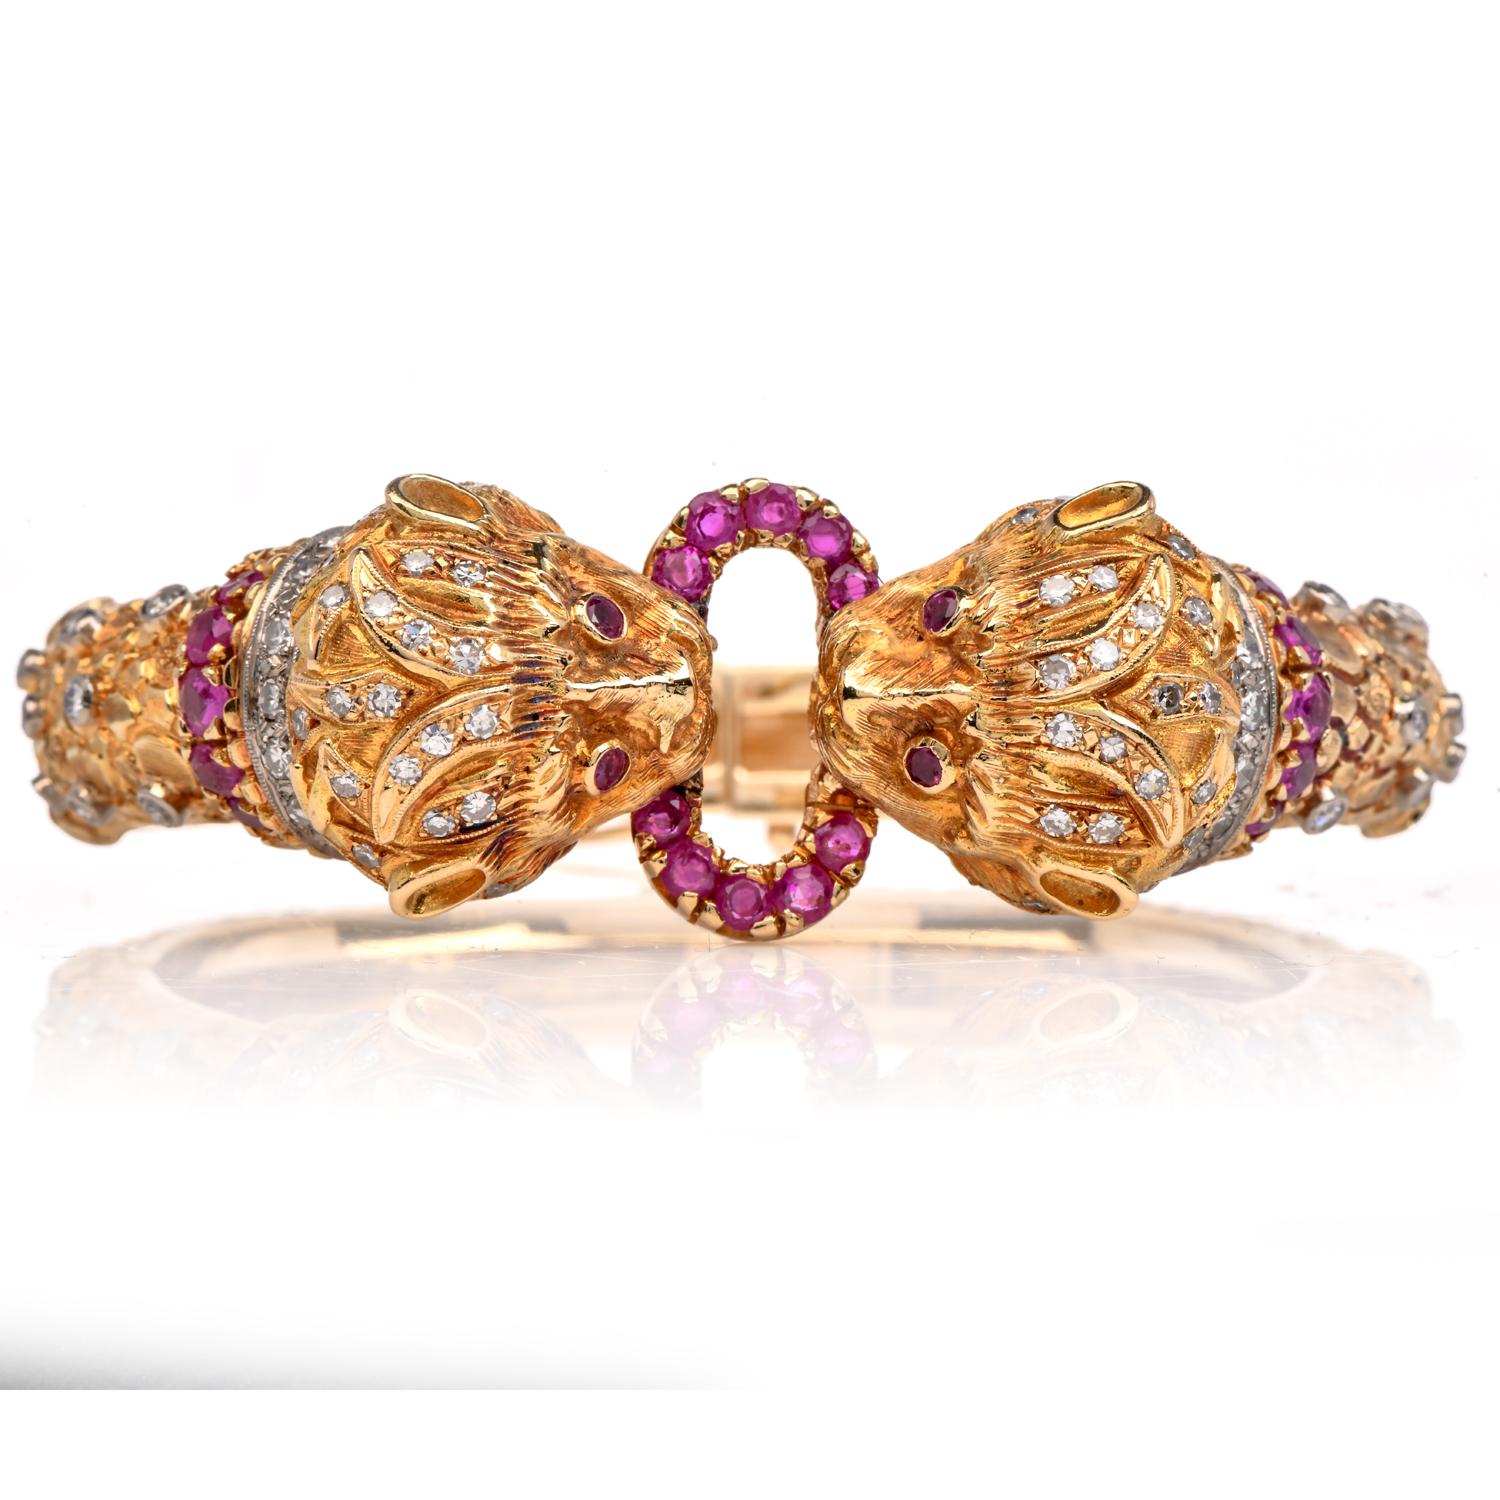 This Vintage Iconic Greek Bangle bracelet by famous Greek designer Lalaounis is created in 18k yellow gold. This highly collectible Lalaounis cuff bangle bracelet is centered with 2 impressive lion heads with genuine ruby eyes and diamonds on the